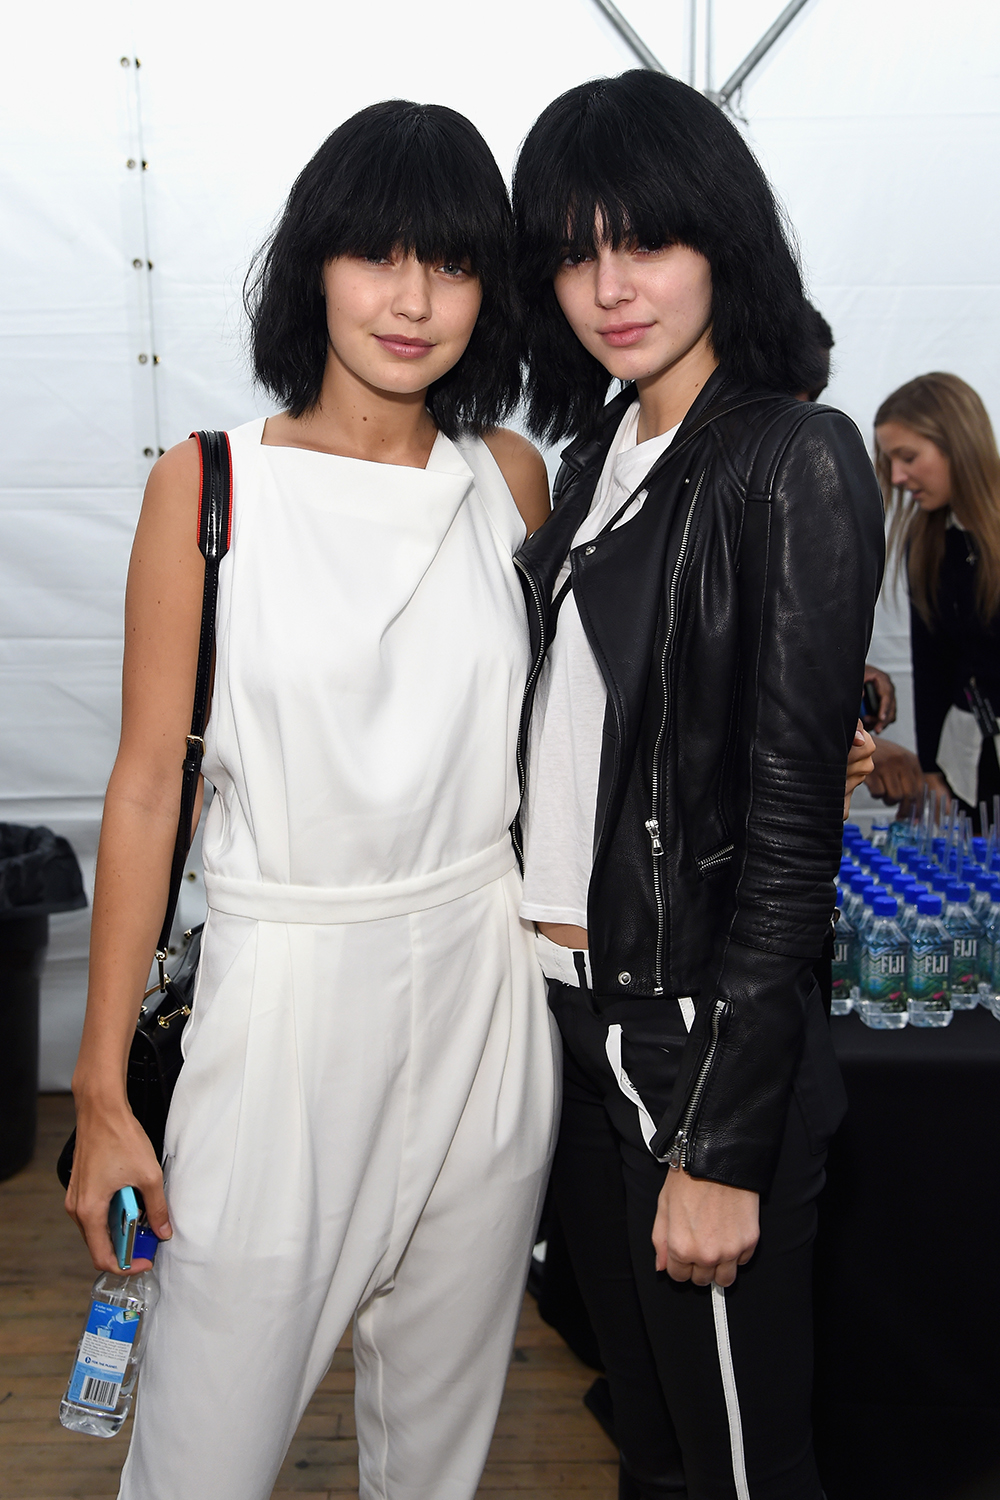 Backstage at Marc Jacobs the girls look unrecognizable in matching black wigs in September 2014.